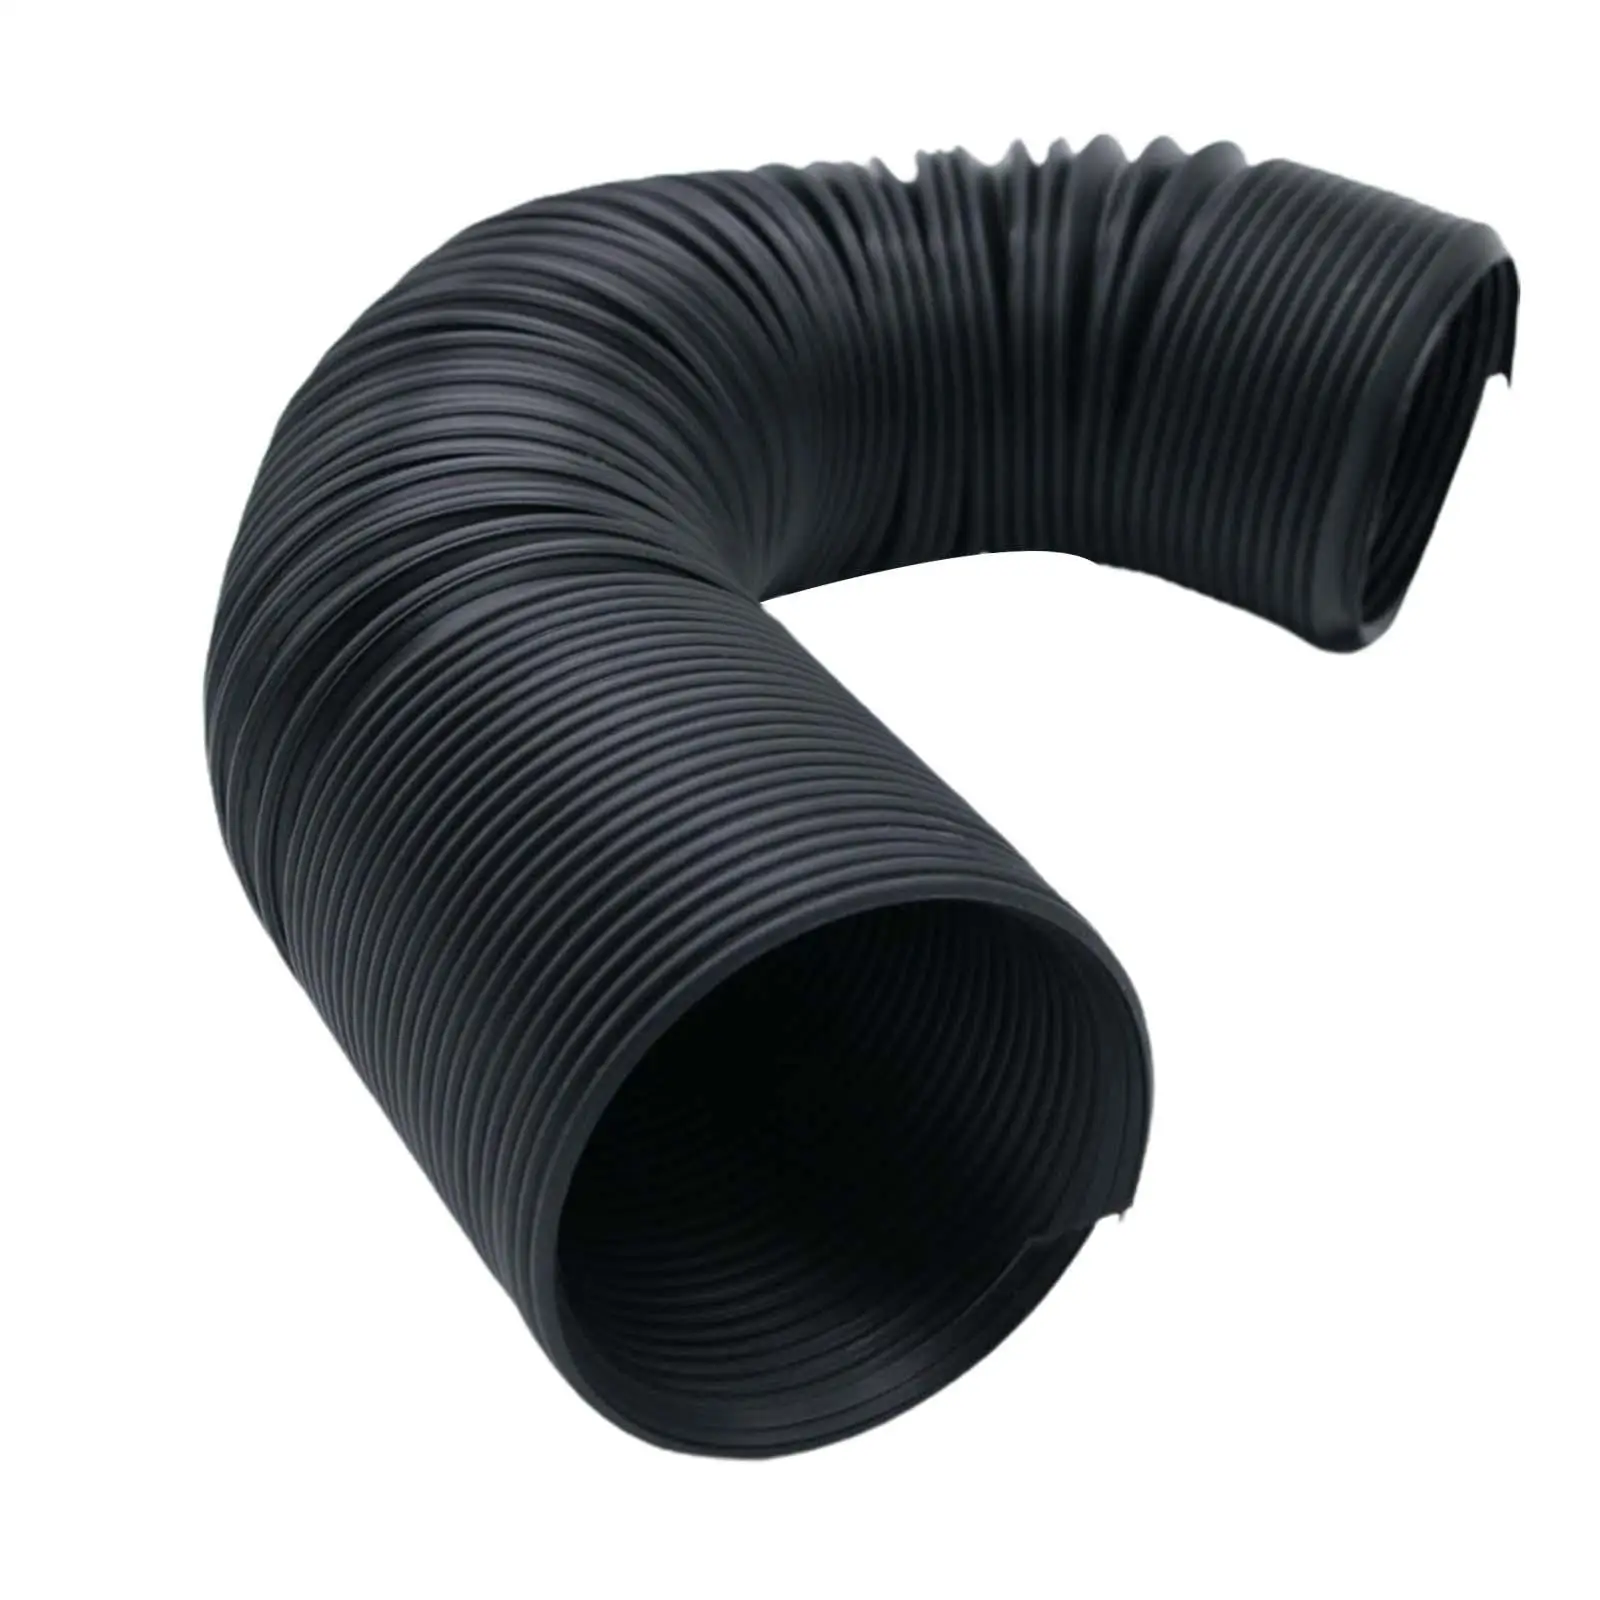 Flexible Cold Air Intake Hose Car Accessories Universal for Vehicles